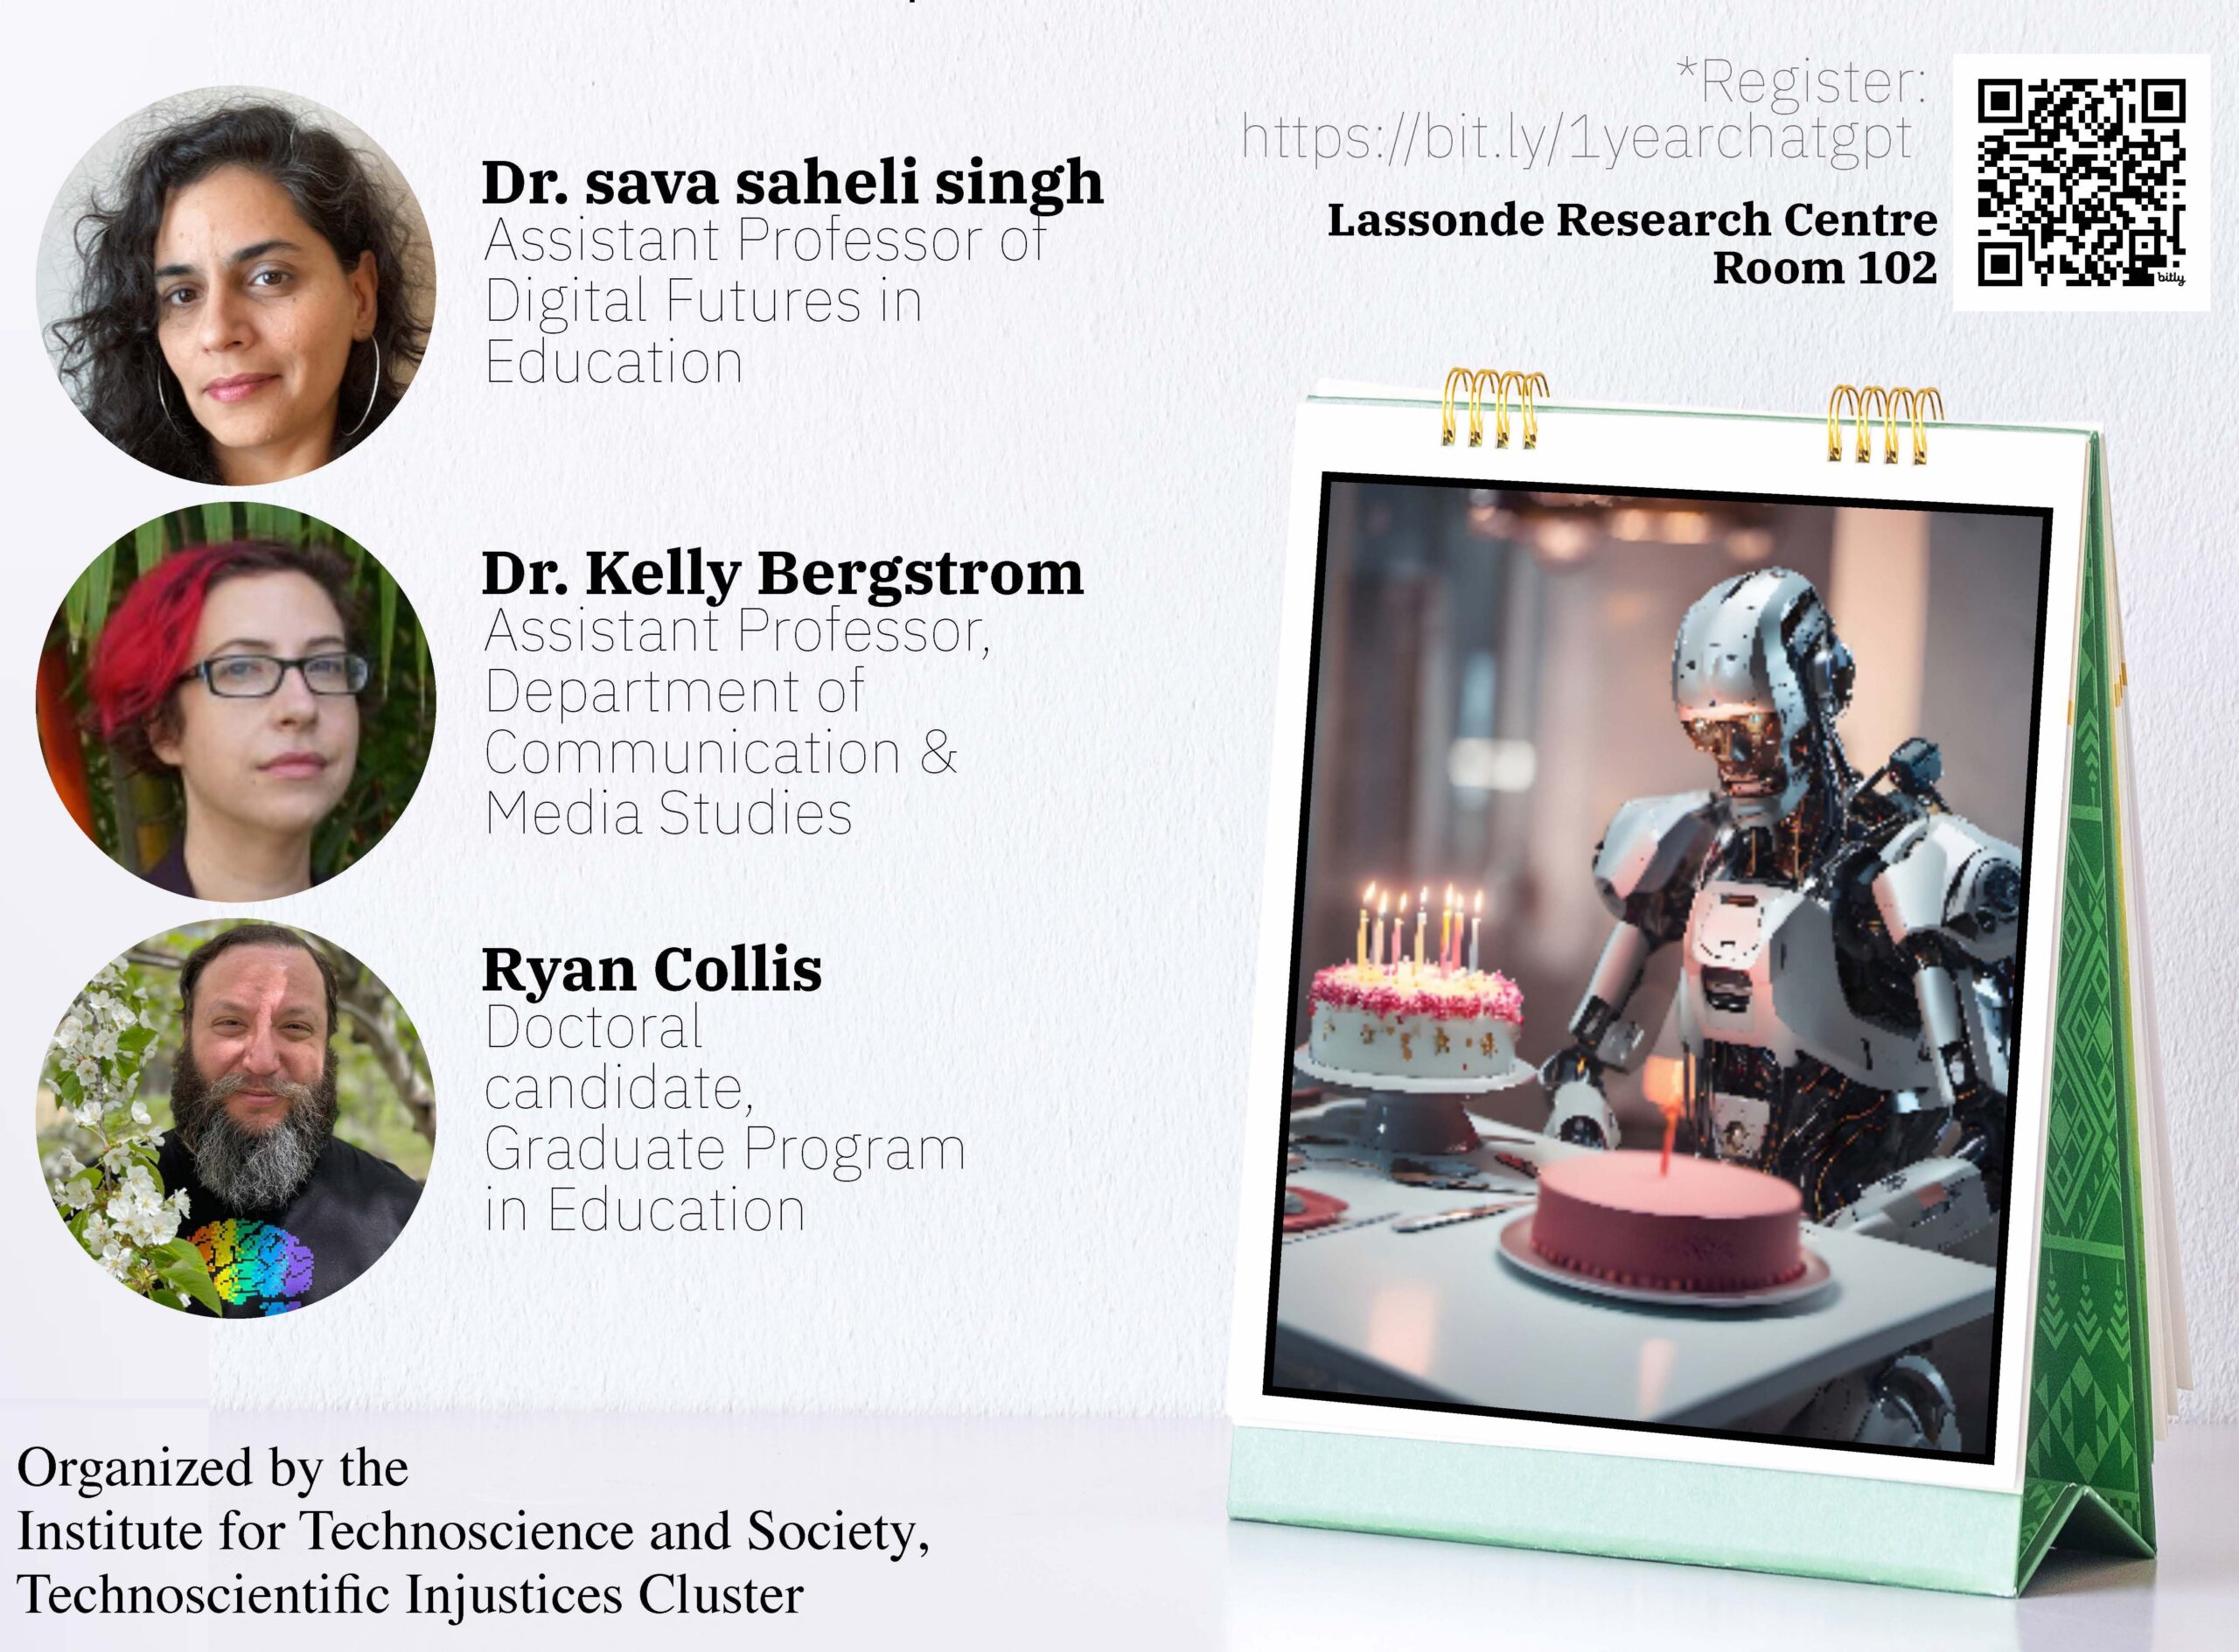 headshots of: Dr. sava saheli singh (Assistant Professor of Digital Futures in Education), Dr. Kelly Bergstrom (Assistant Professor, Department of Communication & Media Studies), Ryan Collis (Doctoral Candidate, Graduate Program in Education); image of robot sitting in front of a birthday cake with candles